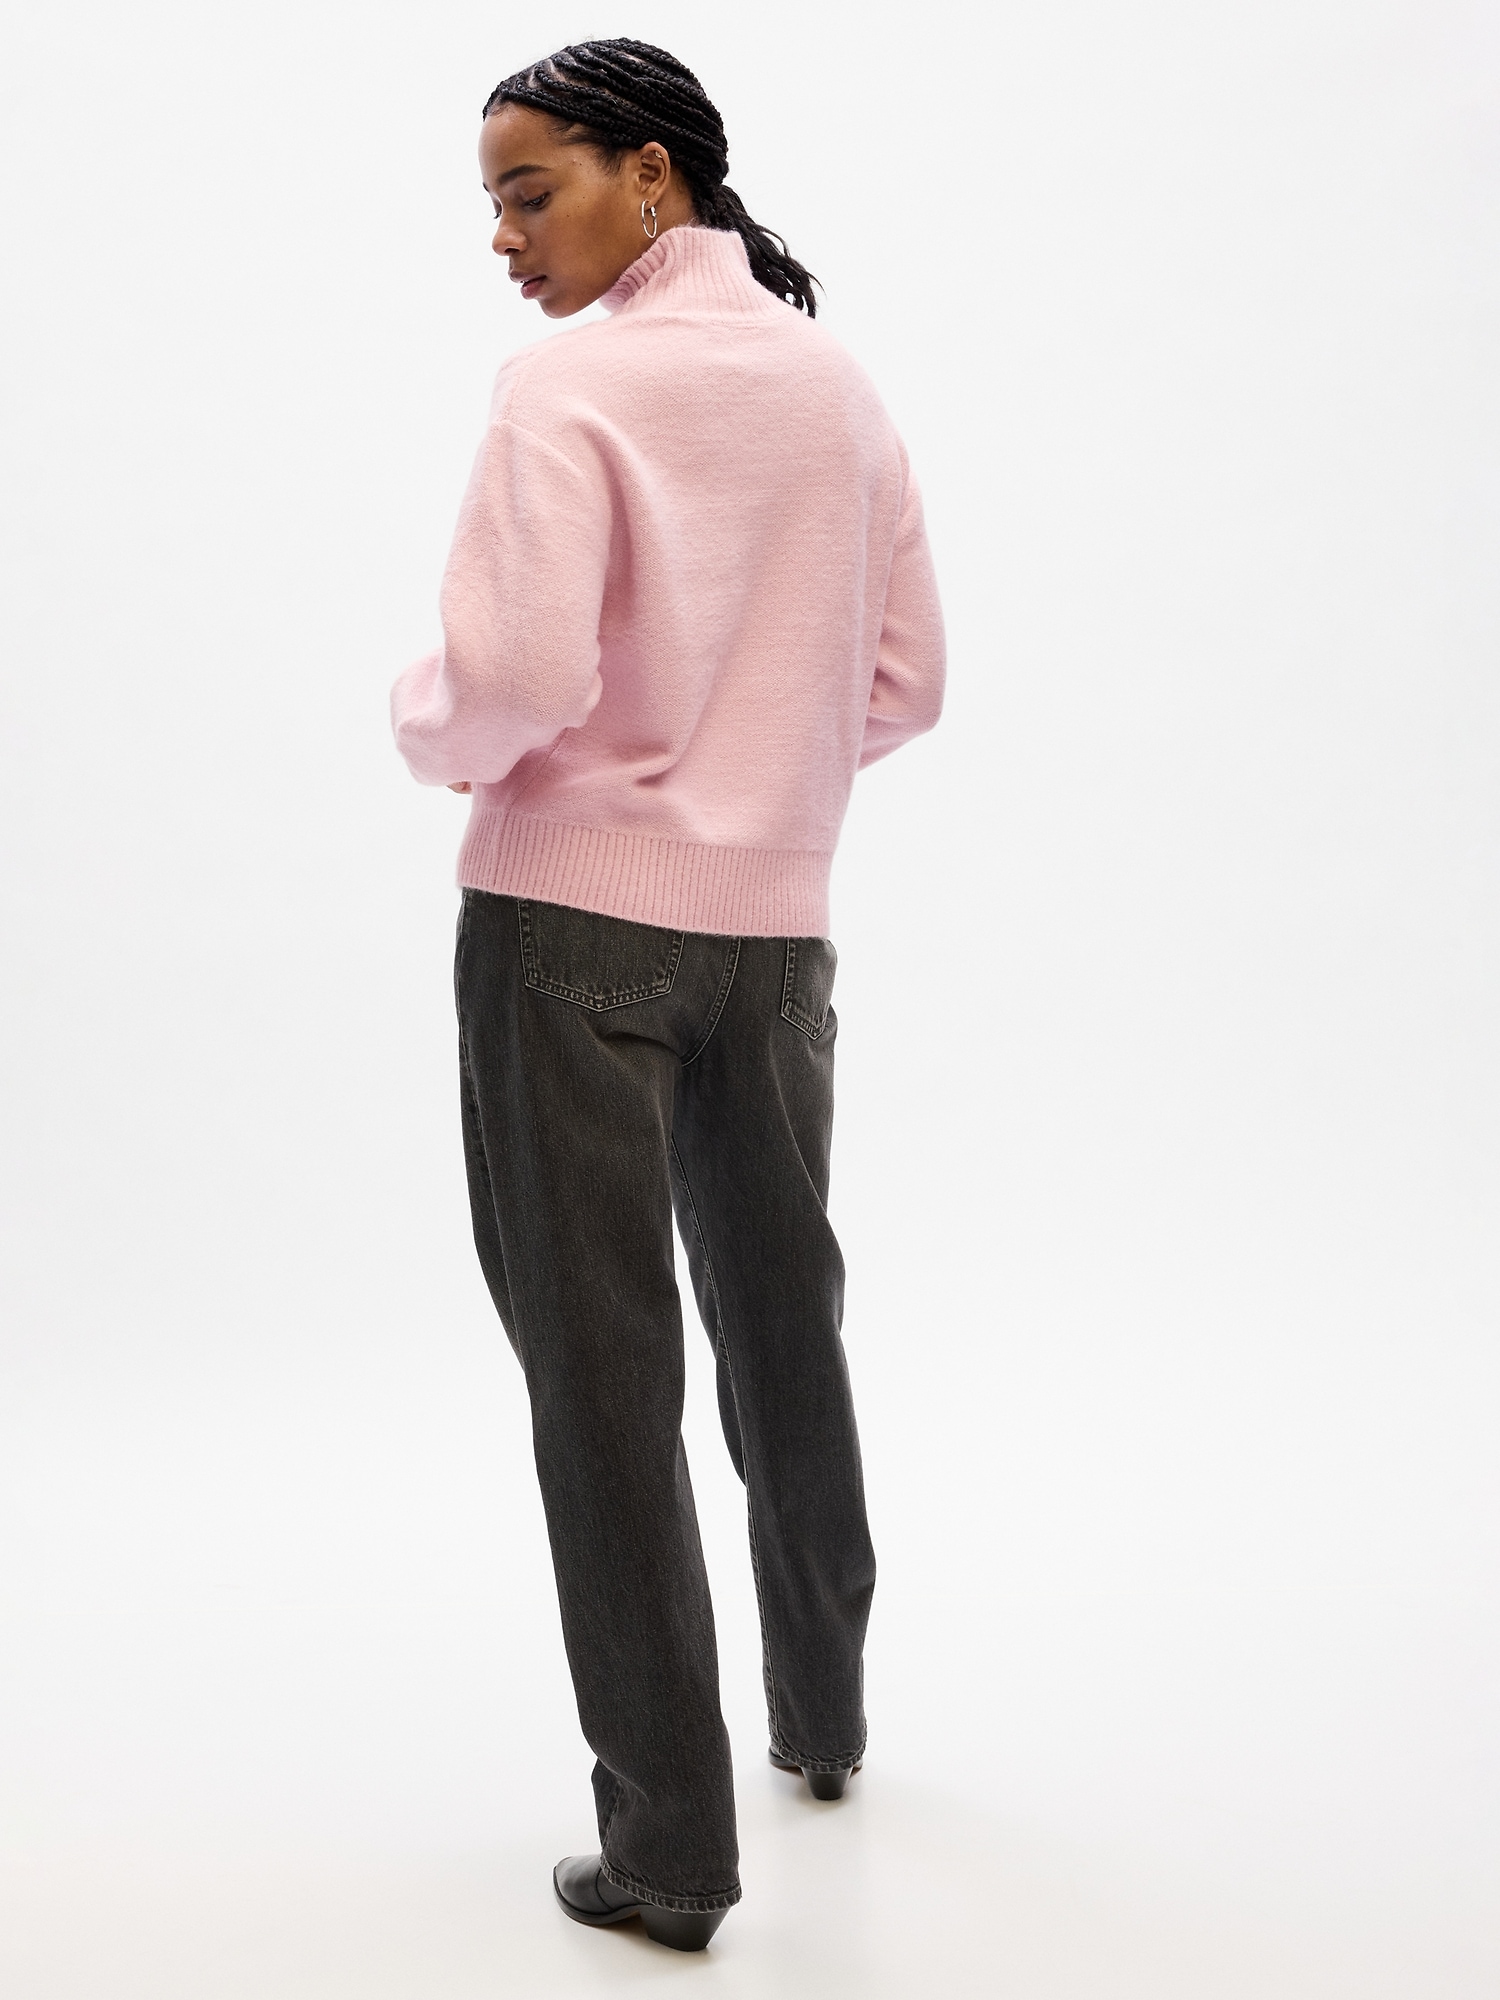 Relaxed Forever Cozy Cable-Knit Sweater | Gap Factory